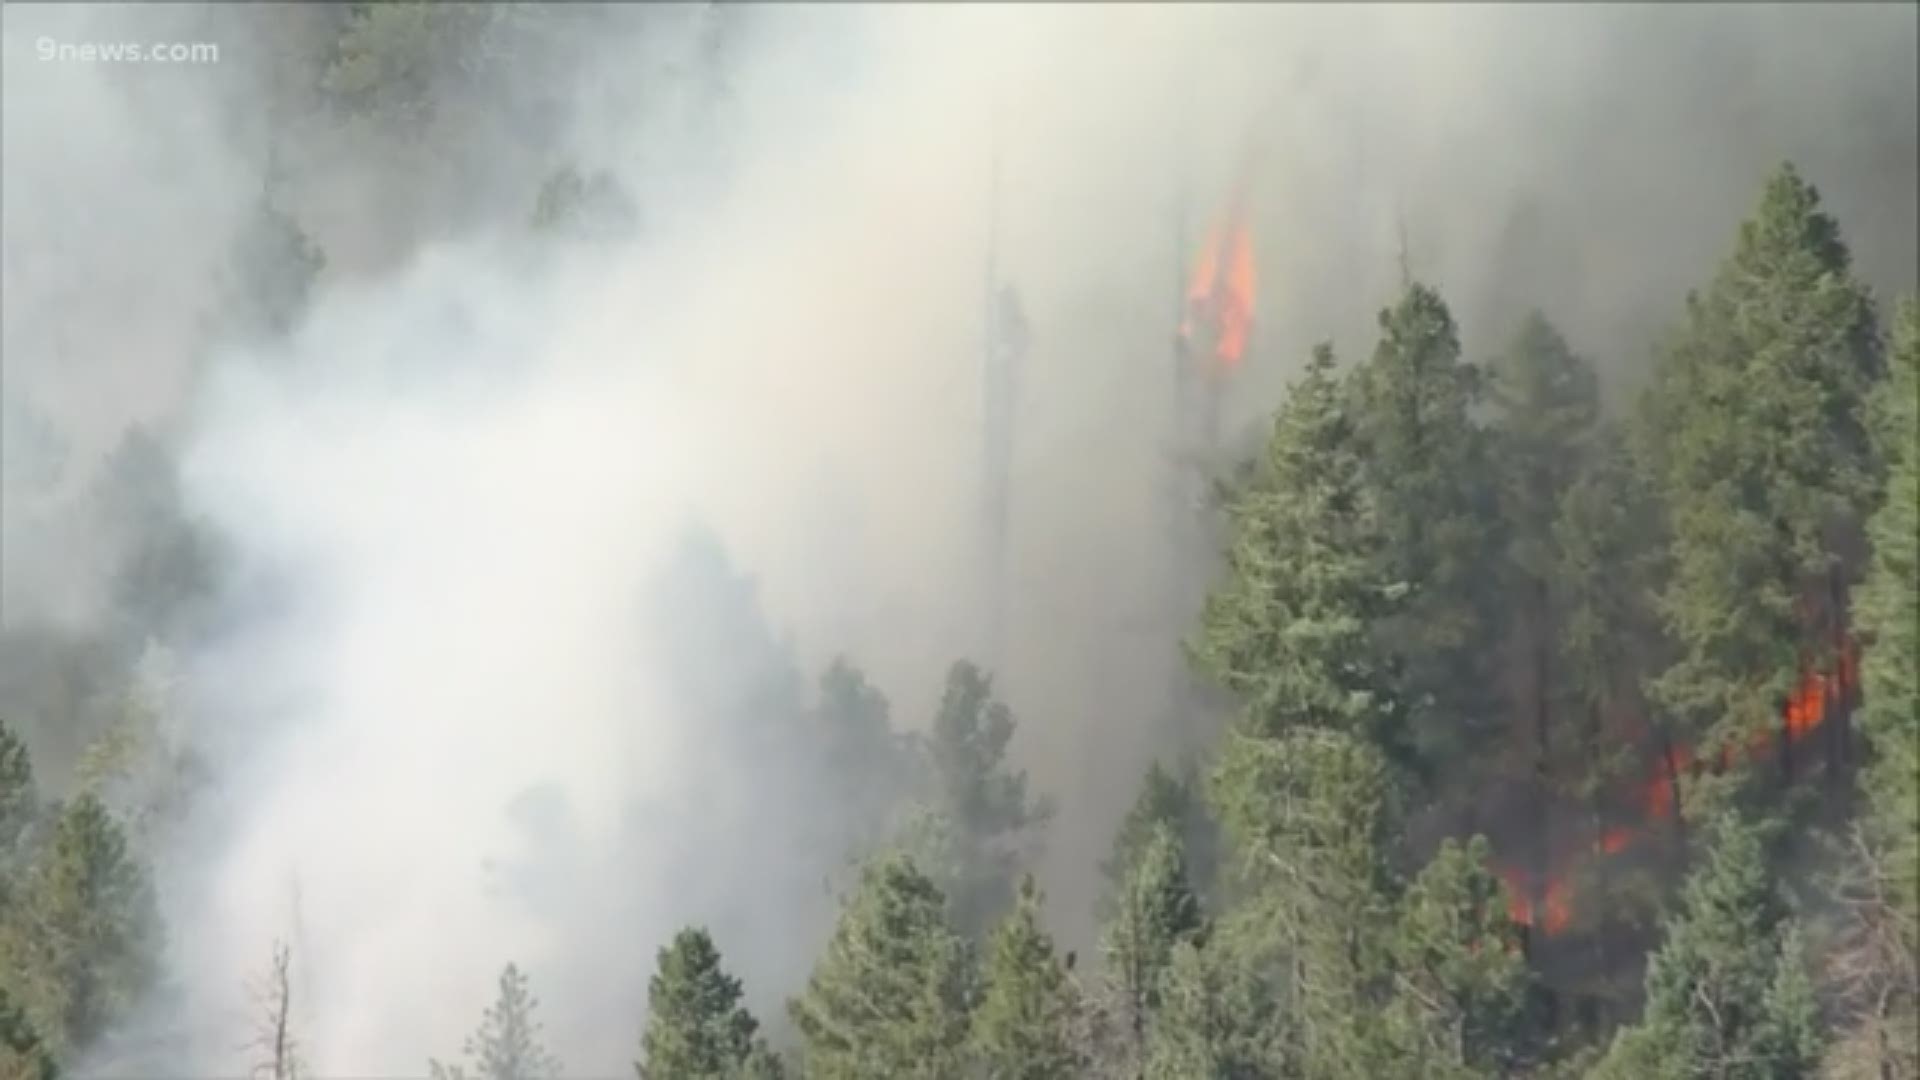 Evacuations were issued to 250 homes due to a wildfire burning near Evergreen Monday afternoon.